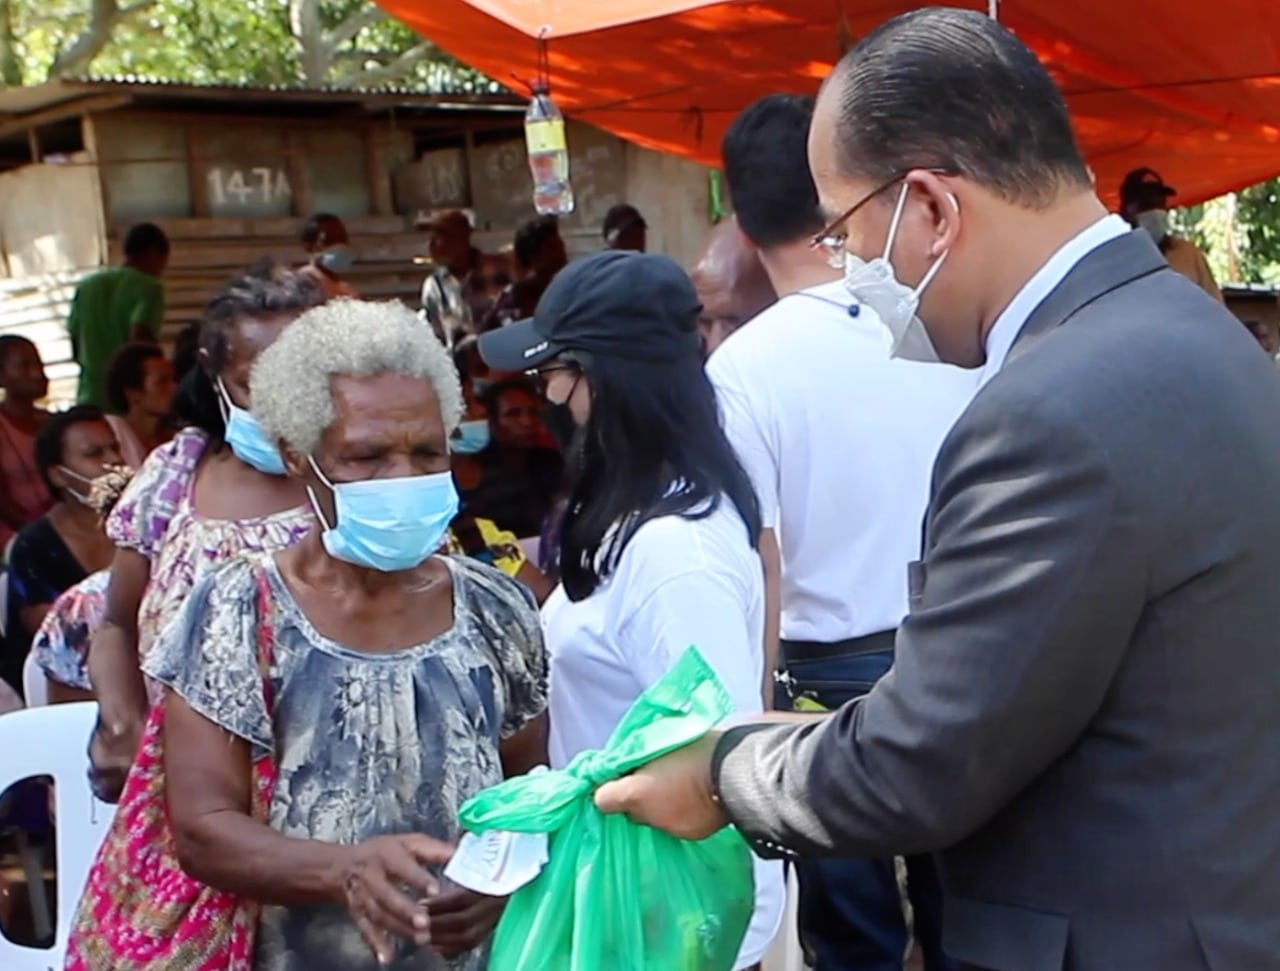 Port Moresby Congregation holds Aid to Humanity for Kipo residents